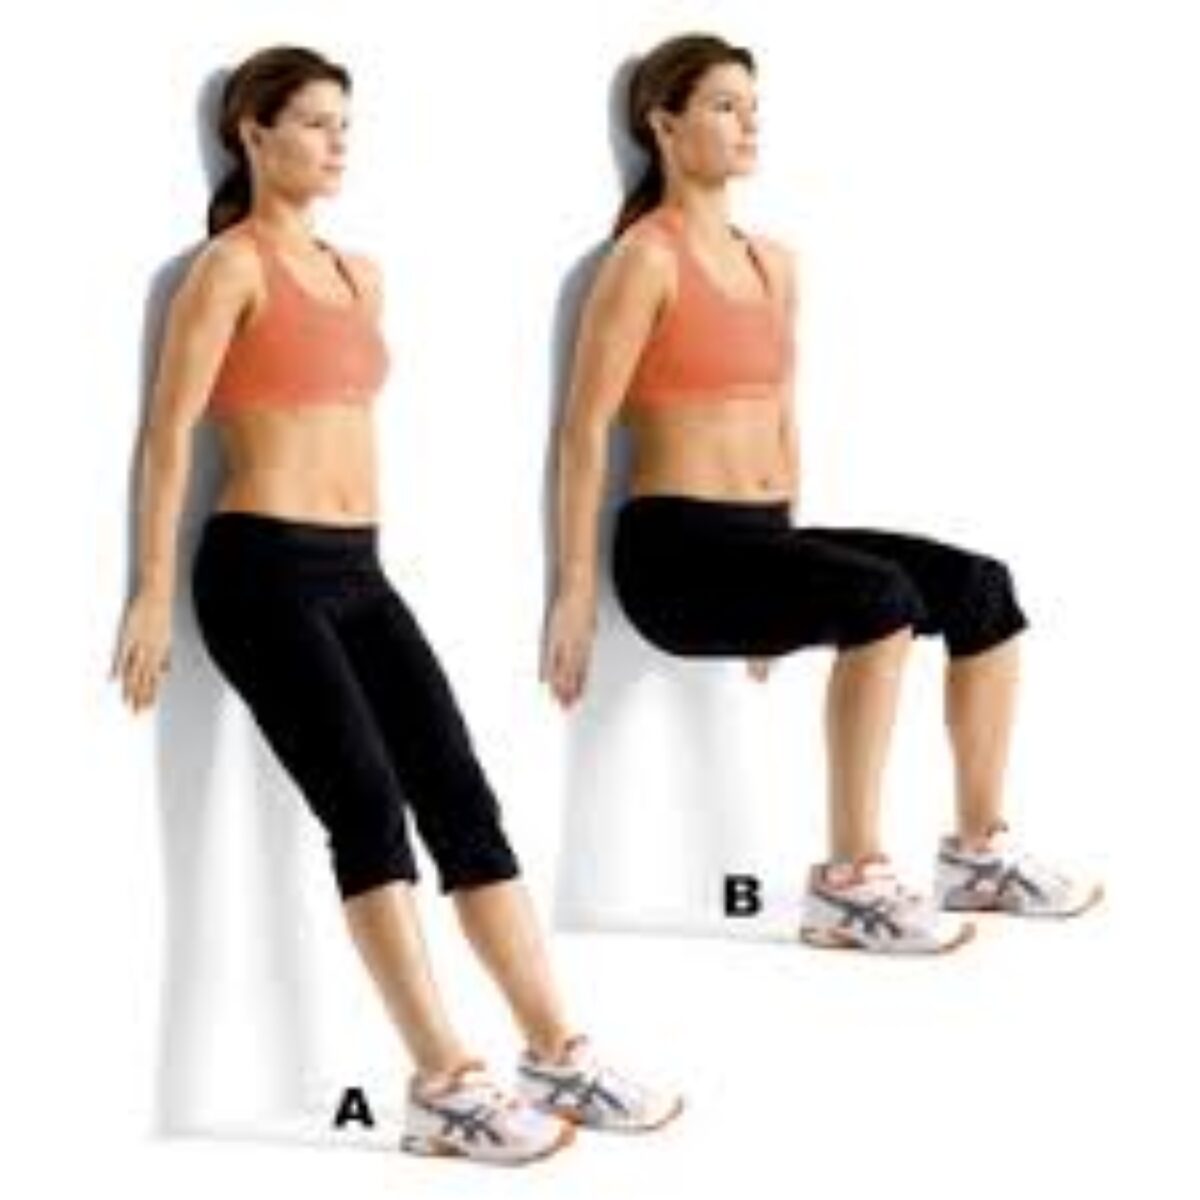 Wall Sit Exercise - How to do?, Variations, Muscle worked, Benefits